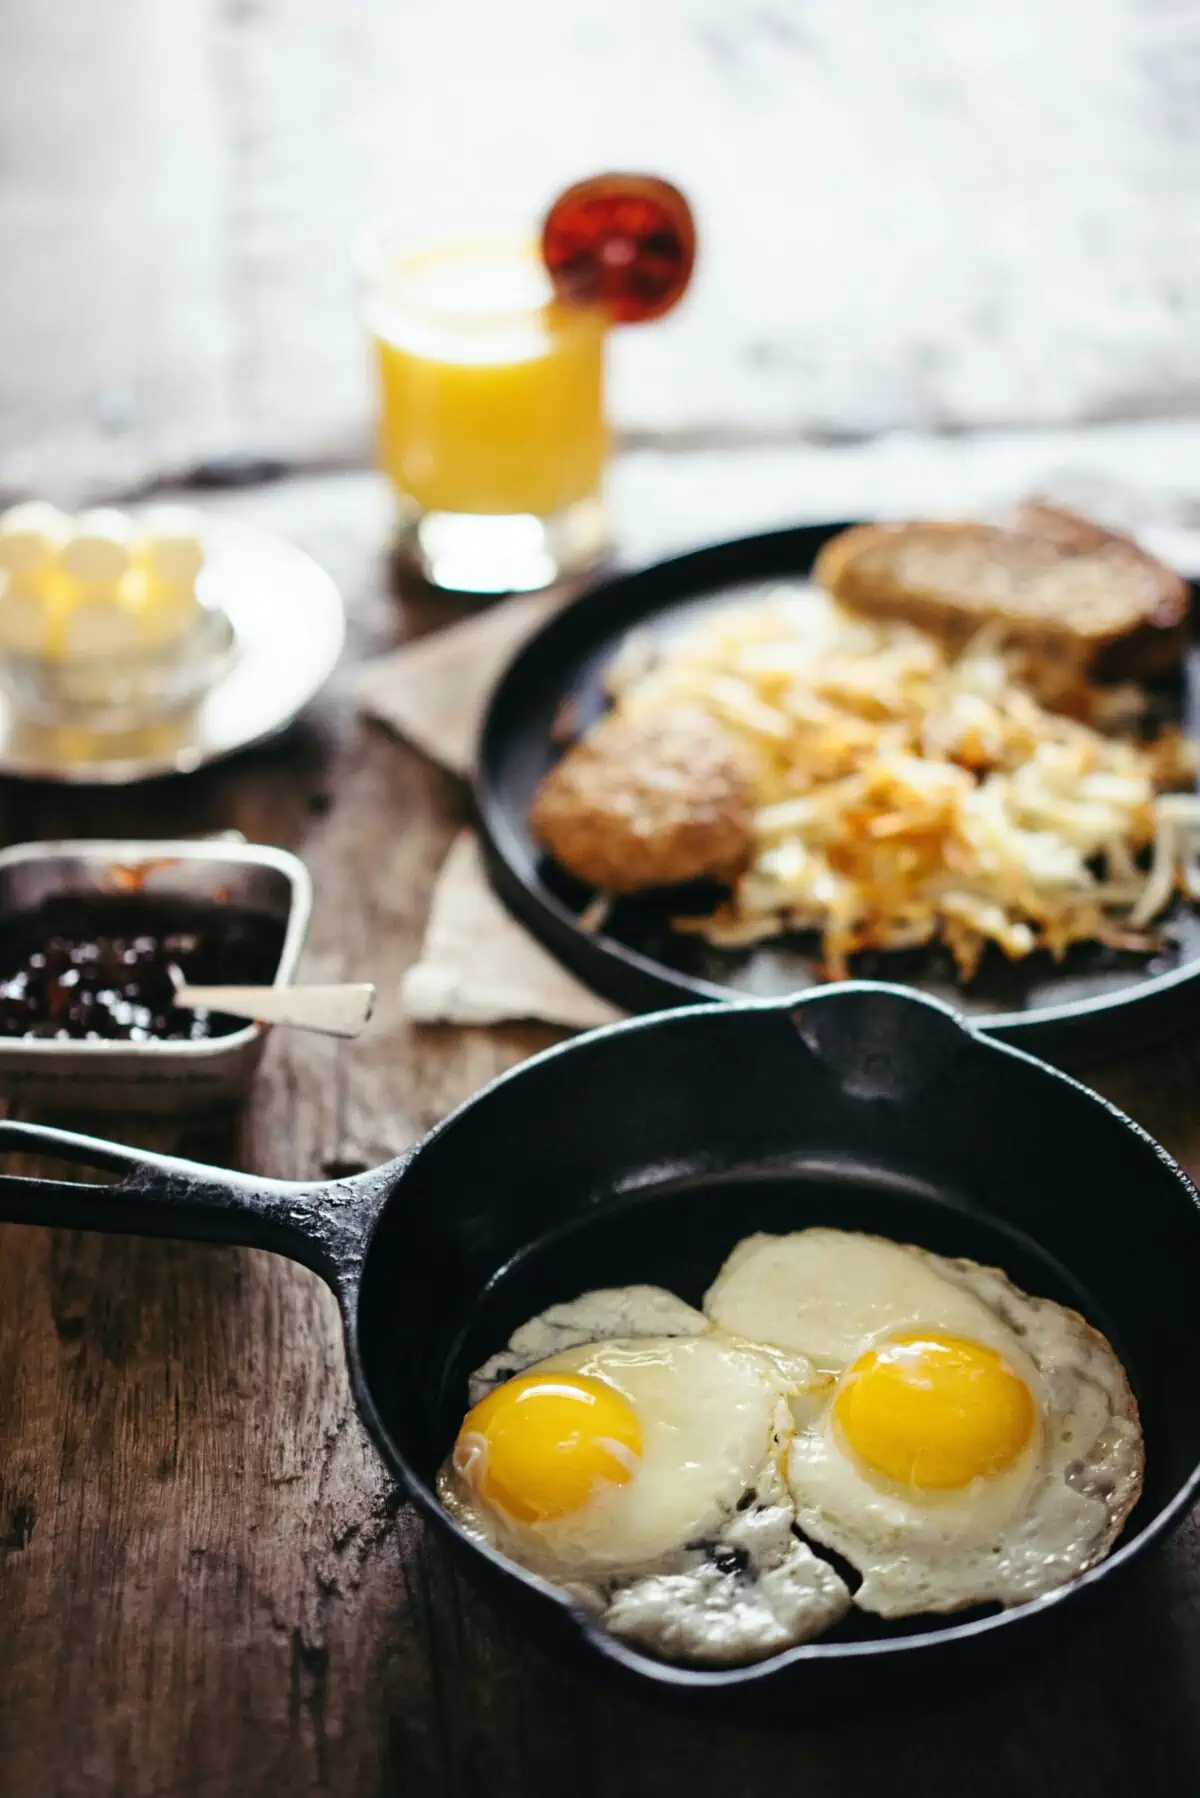 Eggs in a skillet with other breakfast items in an unfocused background.